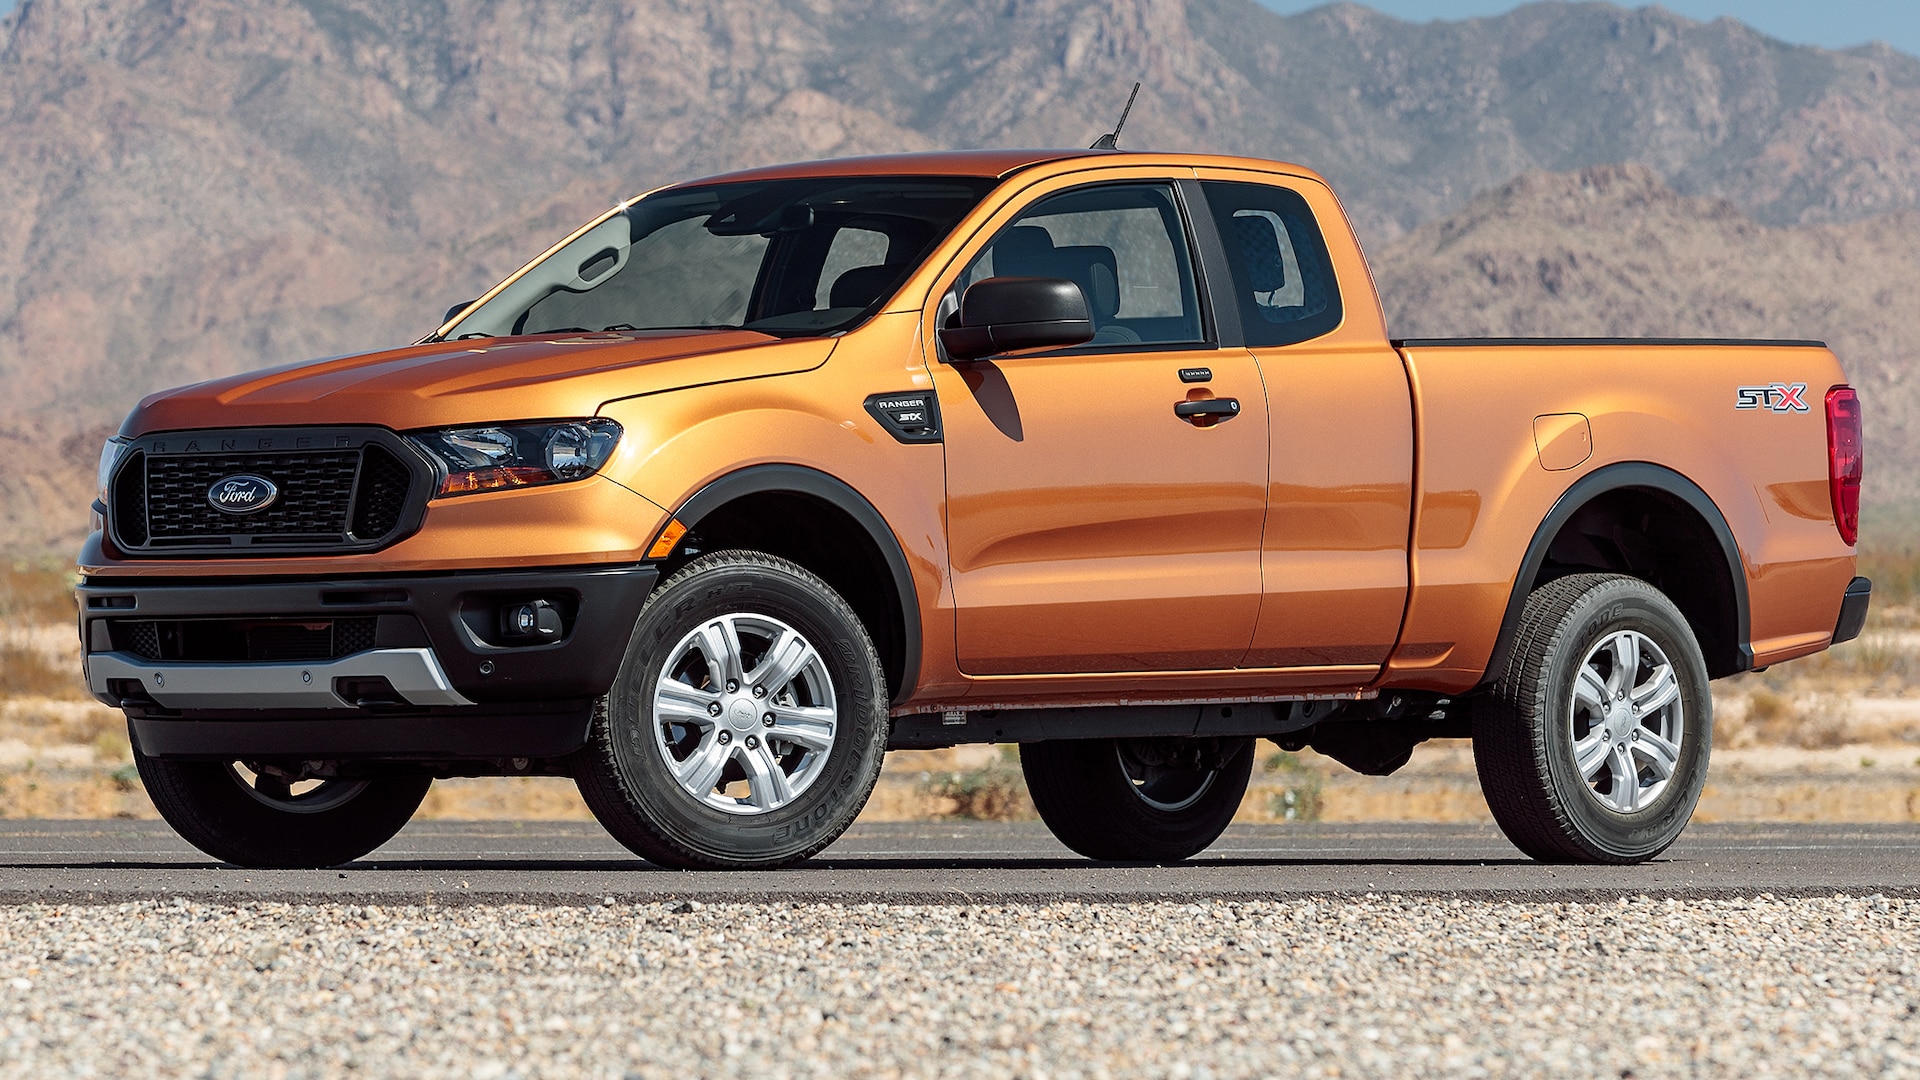 The Best Ford Ranger Is the Cheap One—Here's Why